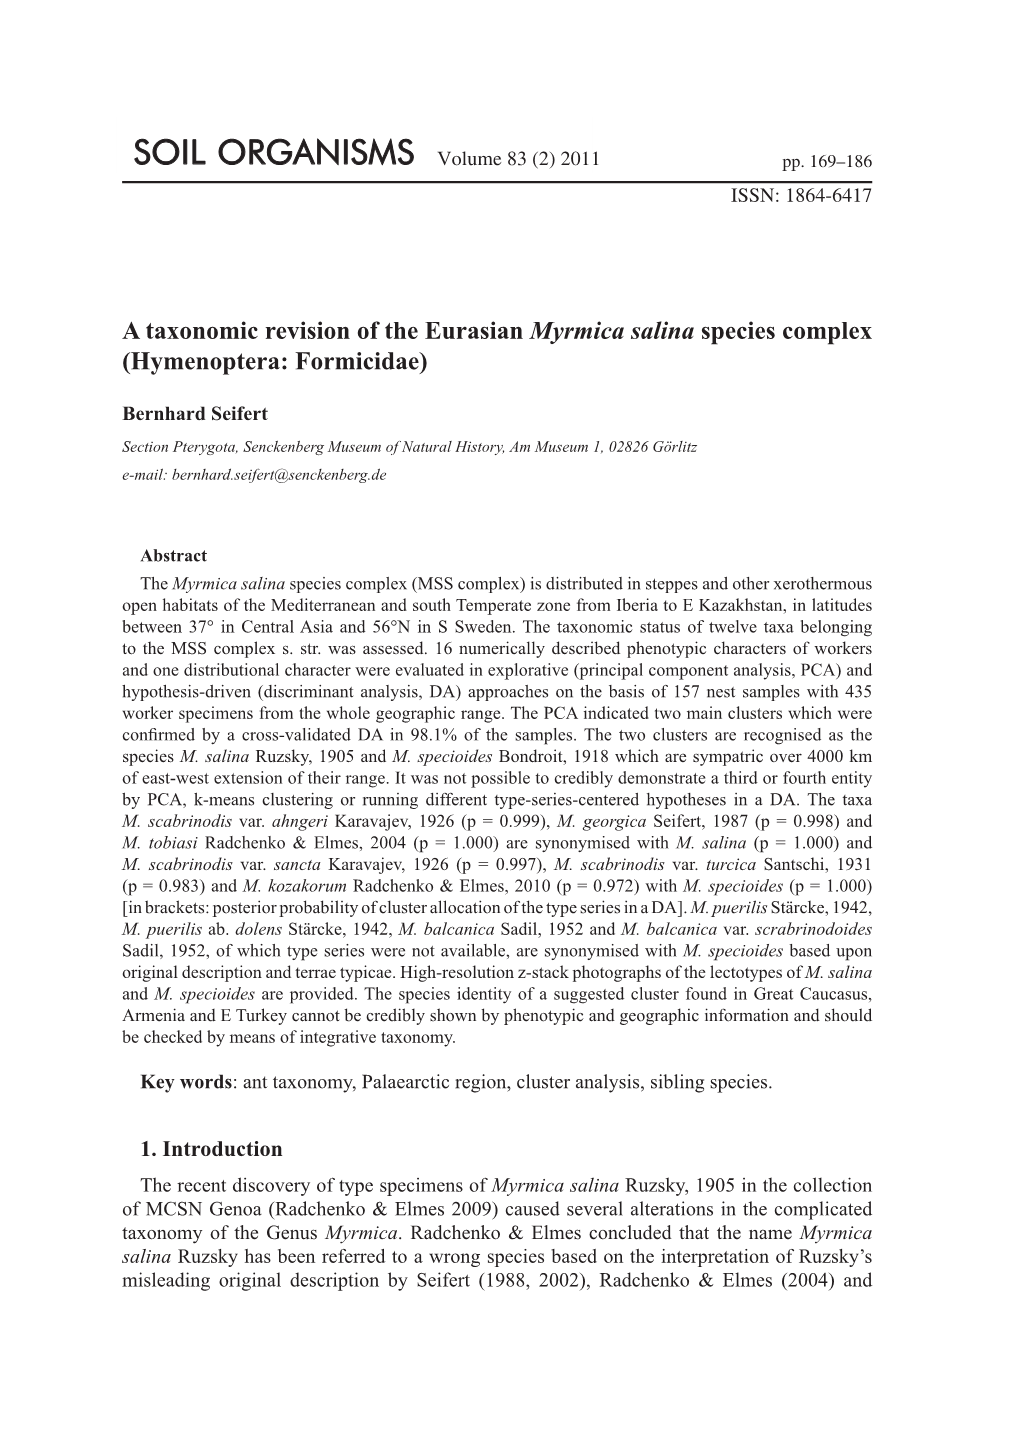 A Taxonomic Revision of the Eurasian Myrmica Salina Species Complex (Hymenoptera: Formicidae)